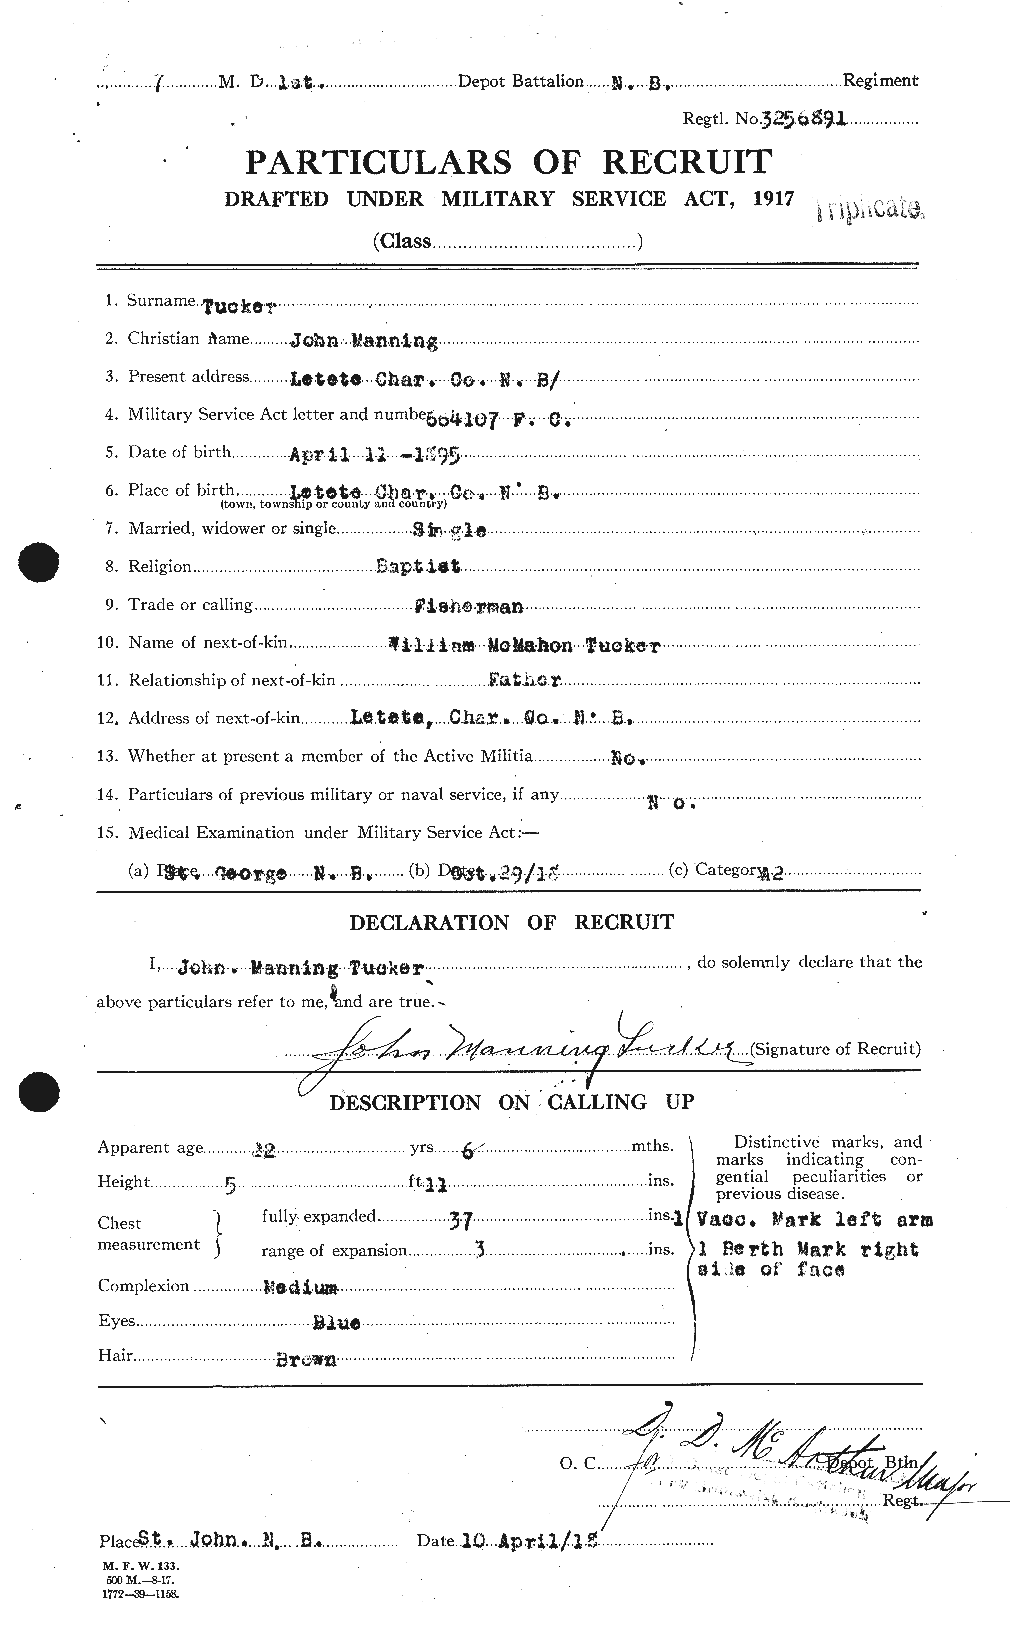 Personnel Records of the First World War - CEF 642777a